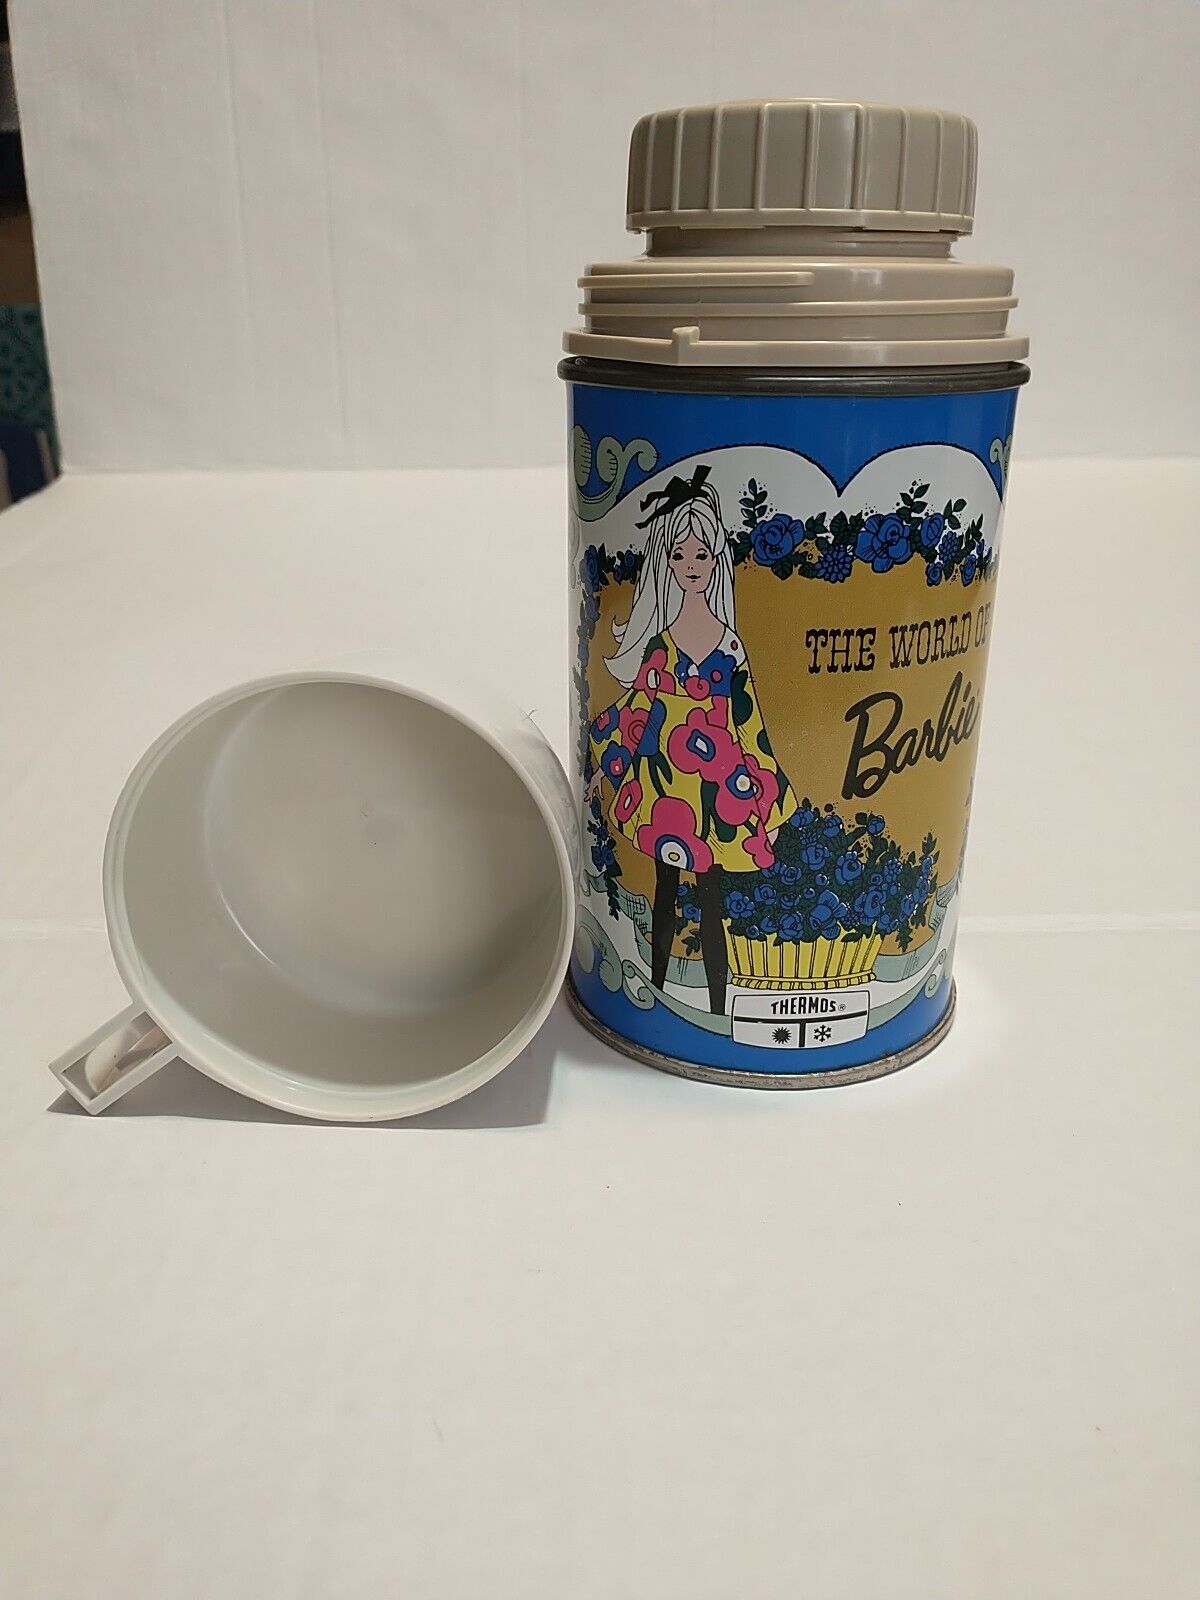 Vintage 1971 The World Of Barbie Thermos With Stopper and Lid Metal Half Pint